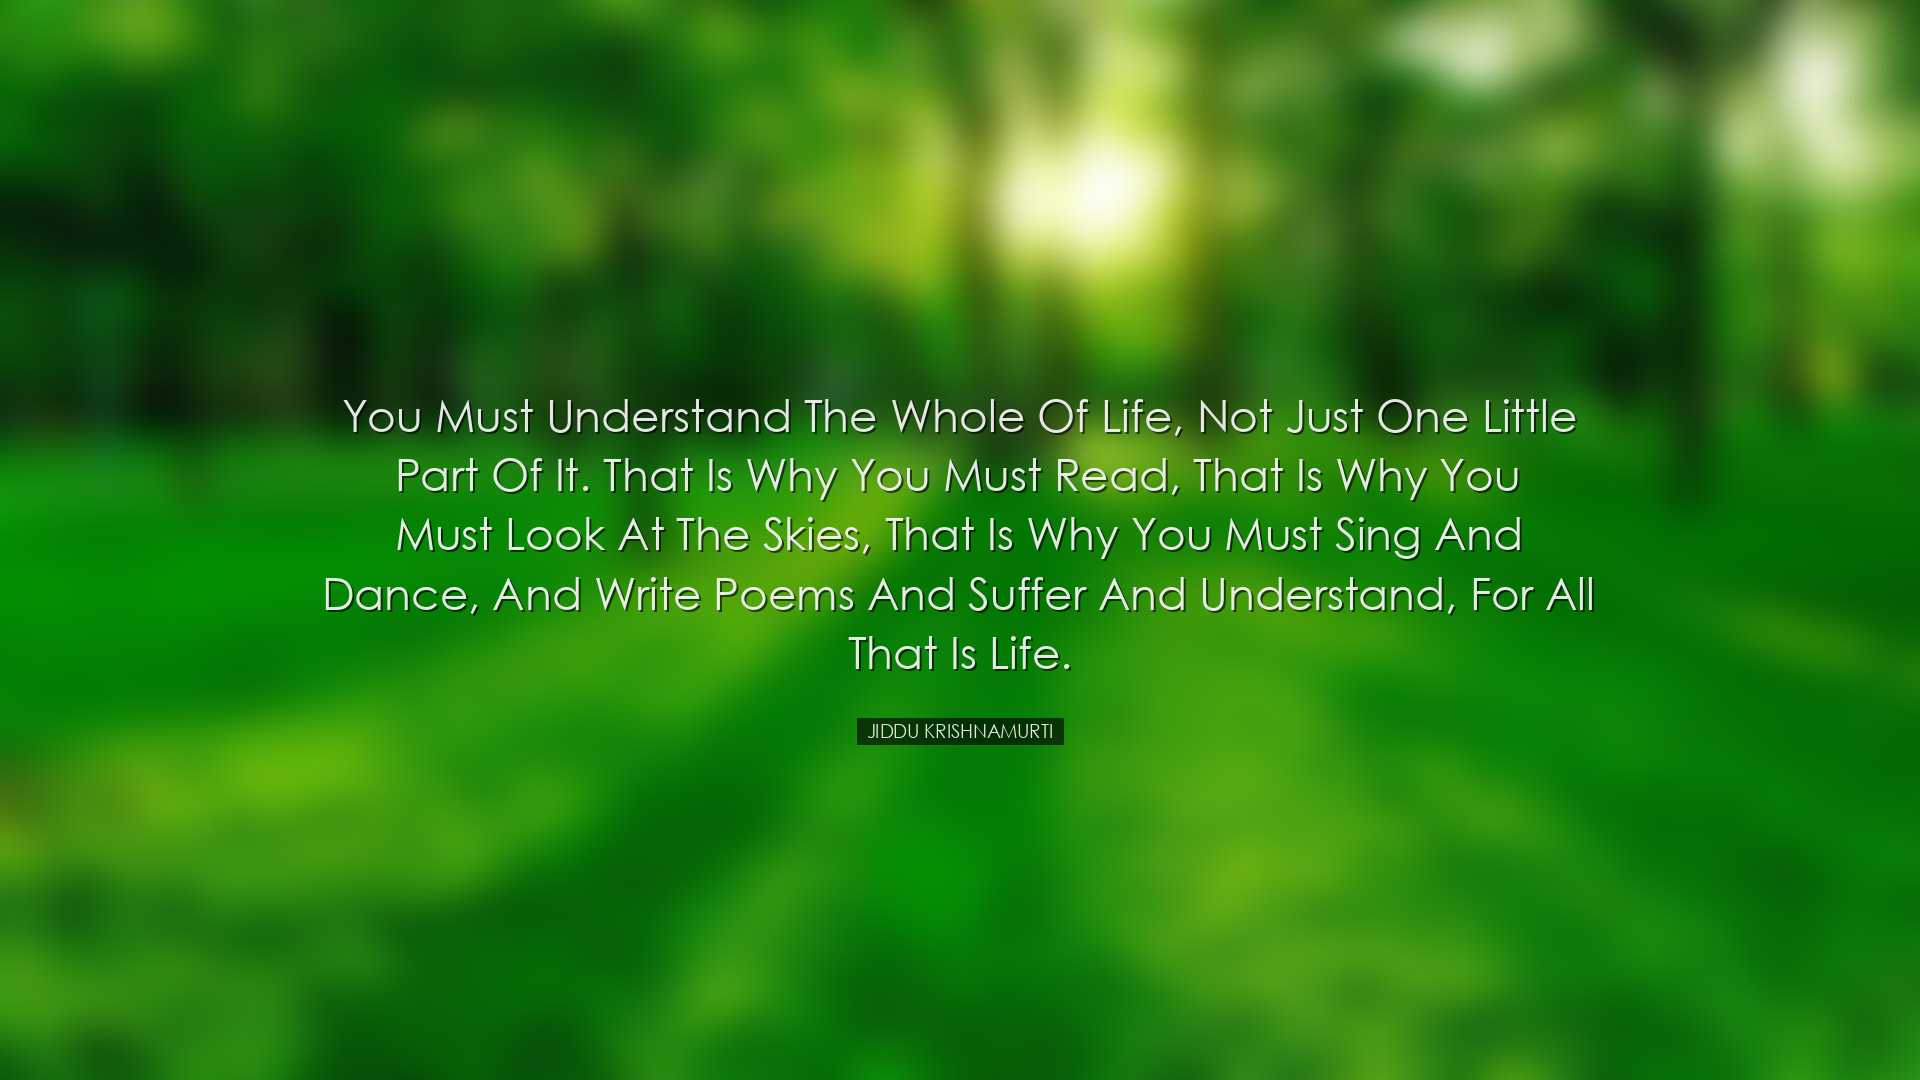 You must understand the whole of life, not just one little part of